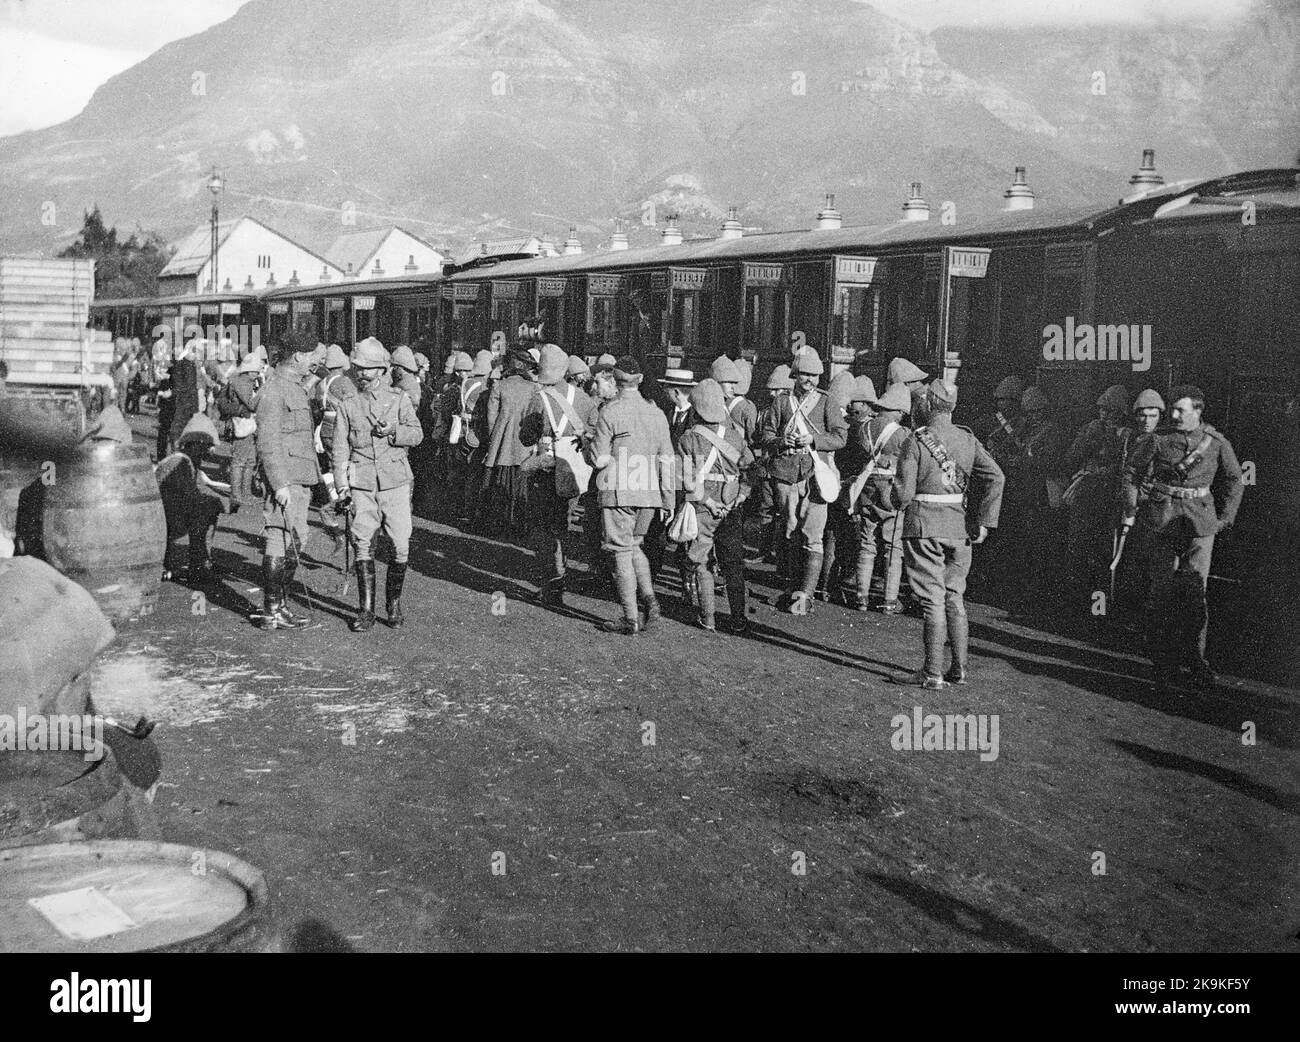 British Soldiers disembarking from a train in South Africa during the Boer War. Stock Photo